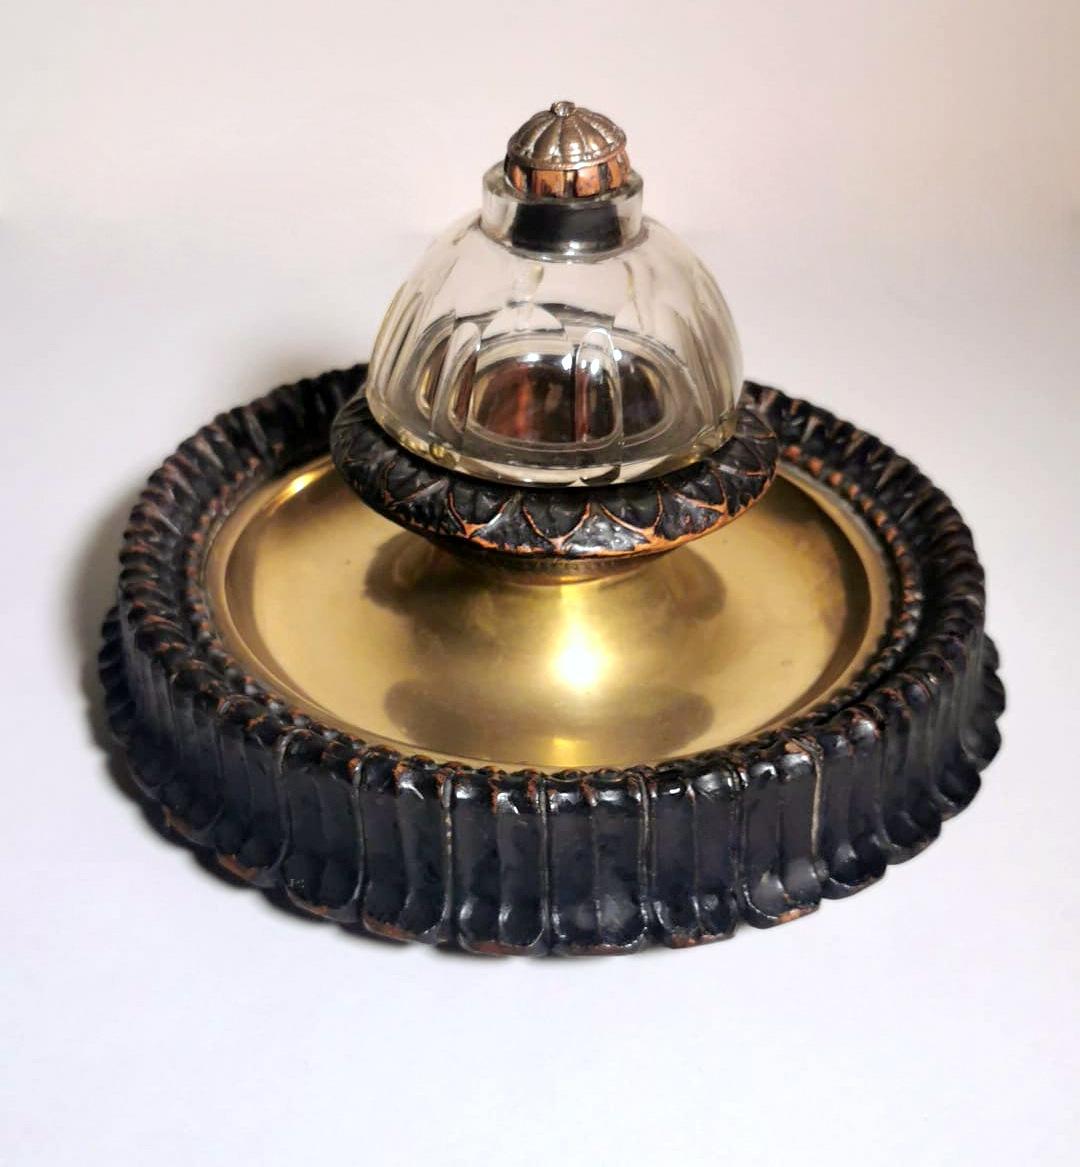 We kindly suggest you read the whole description, because with it we try to give you detailed technical and historical information to guarantee the authenticity of our objects.
Original and rare French inkwell; the entire large circular frame is